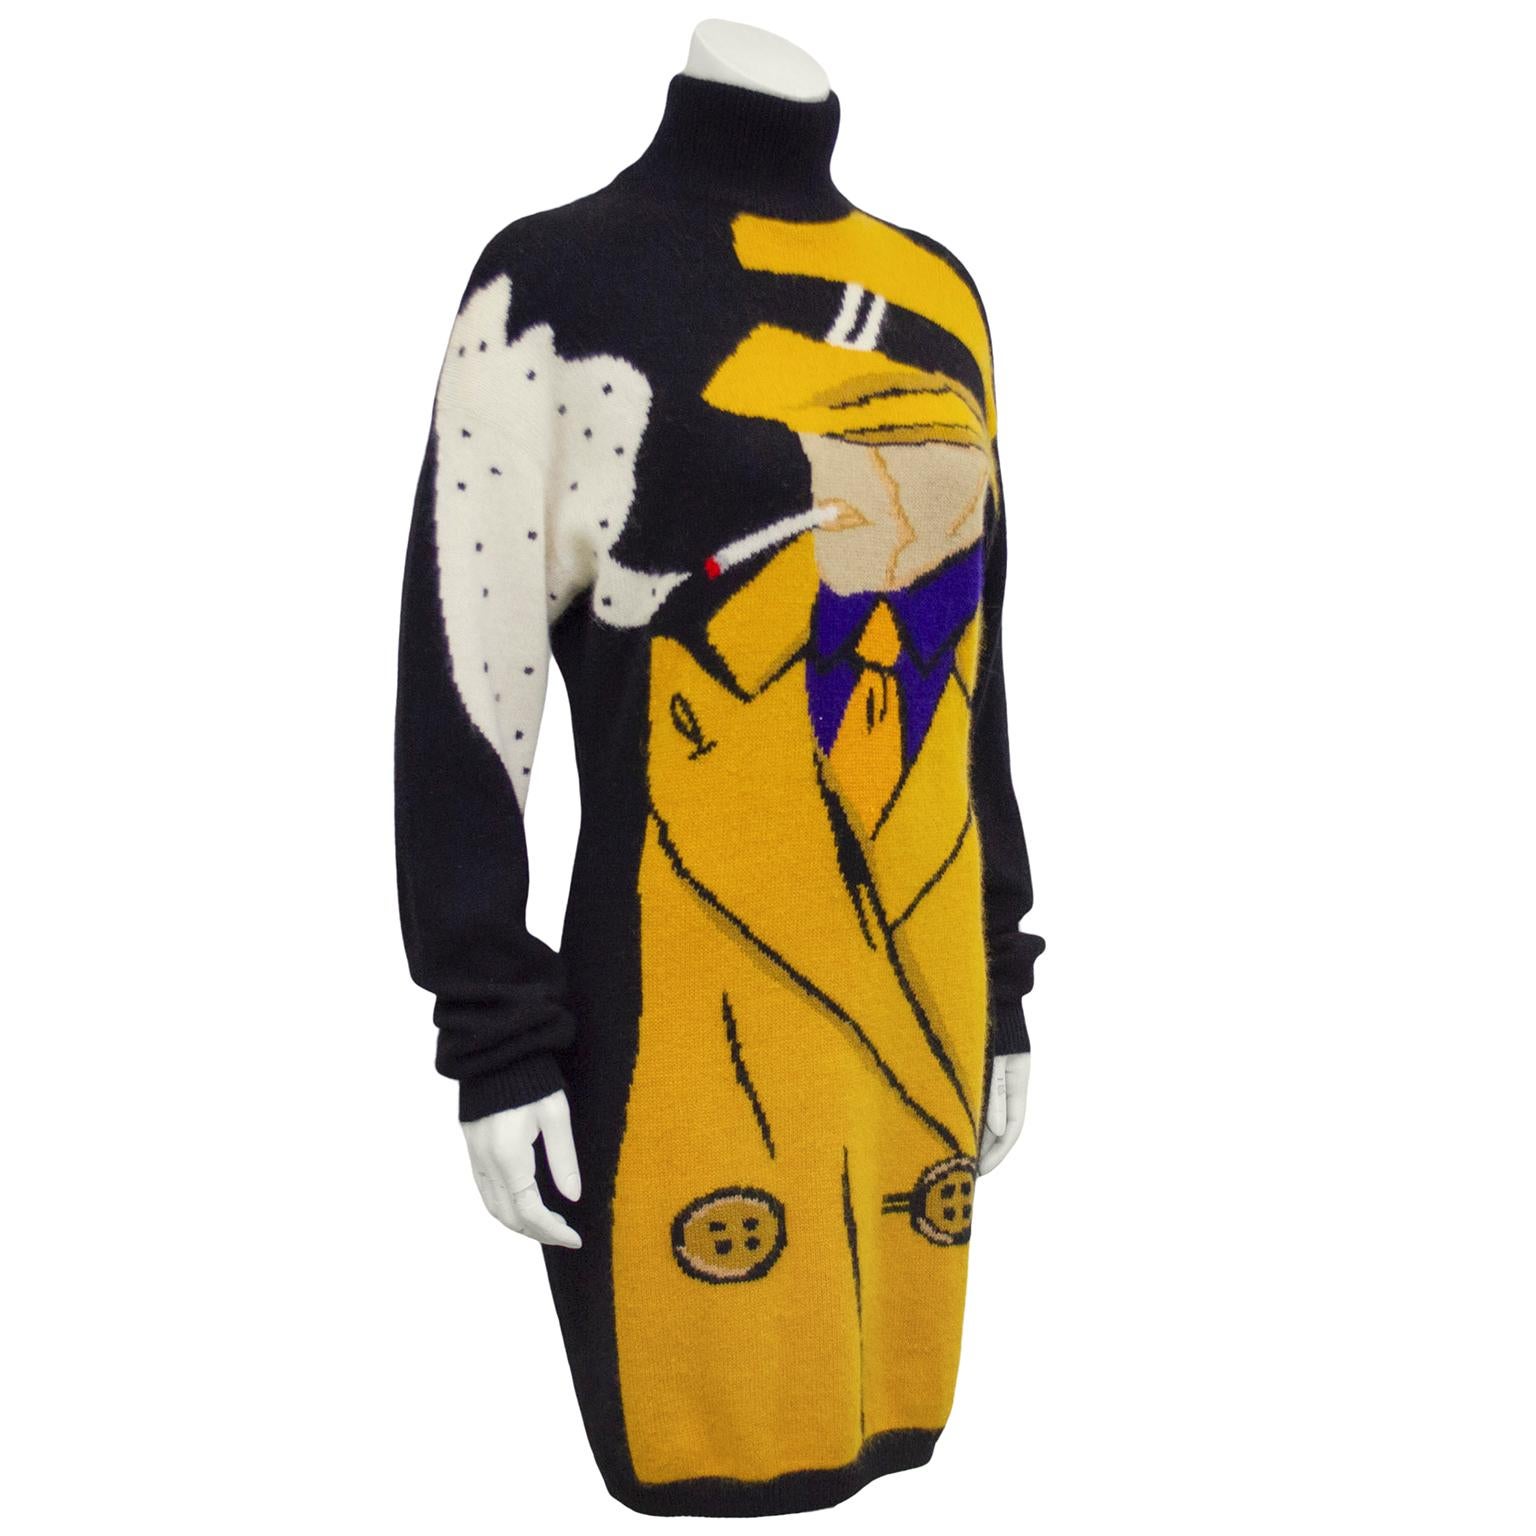 1980s Iconic Krizia wool, angora and nylon blend turtleneck sweater dress. Black with large yellow and blue pop art illustration of Dick Tracy smoking. Cigarette with pop of red at end of cigarette and cloud of white and black polka dot smoke. Long